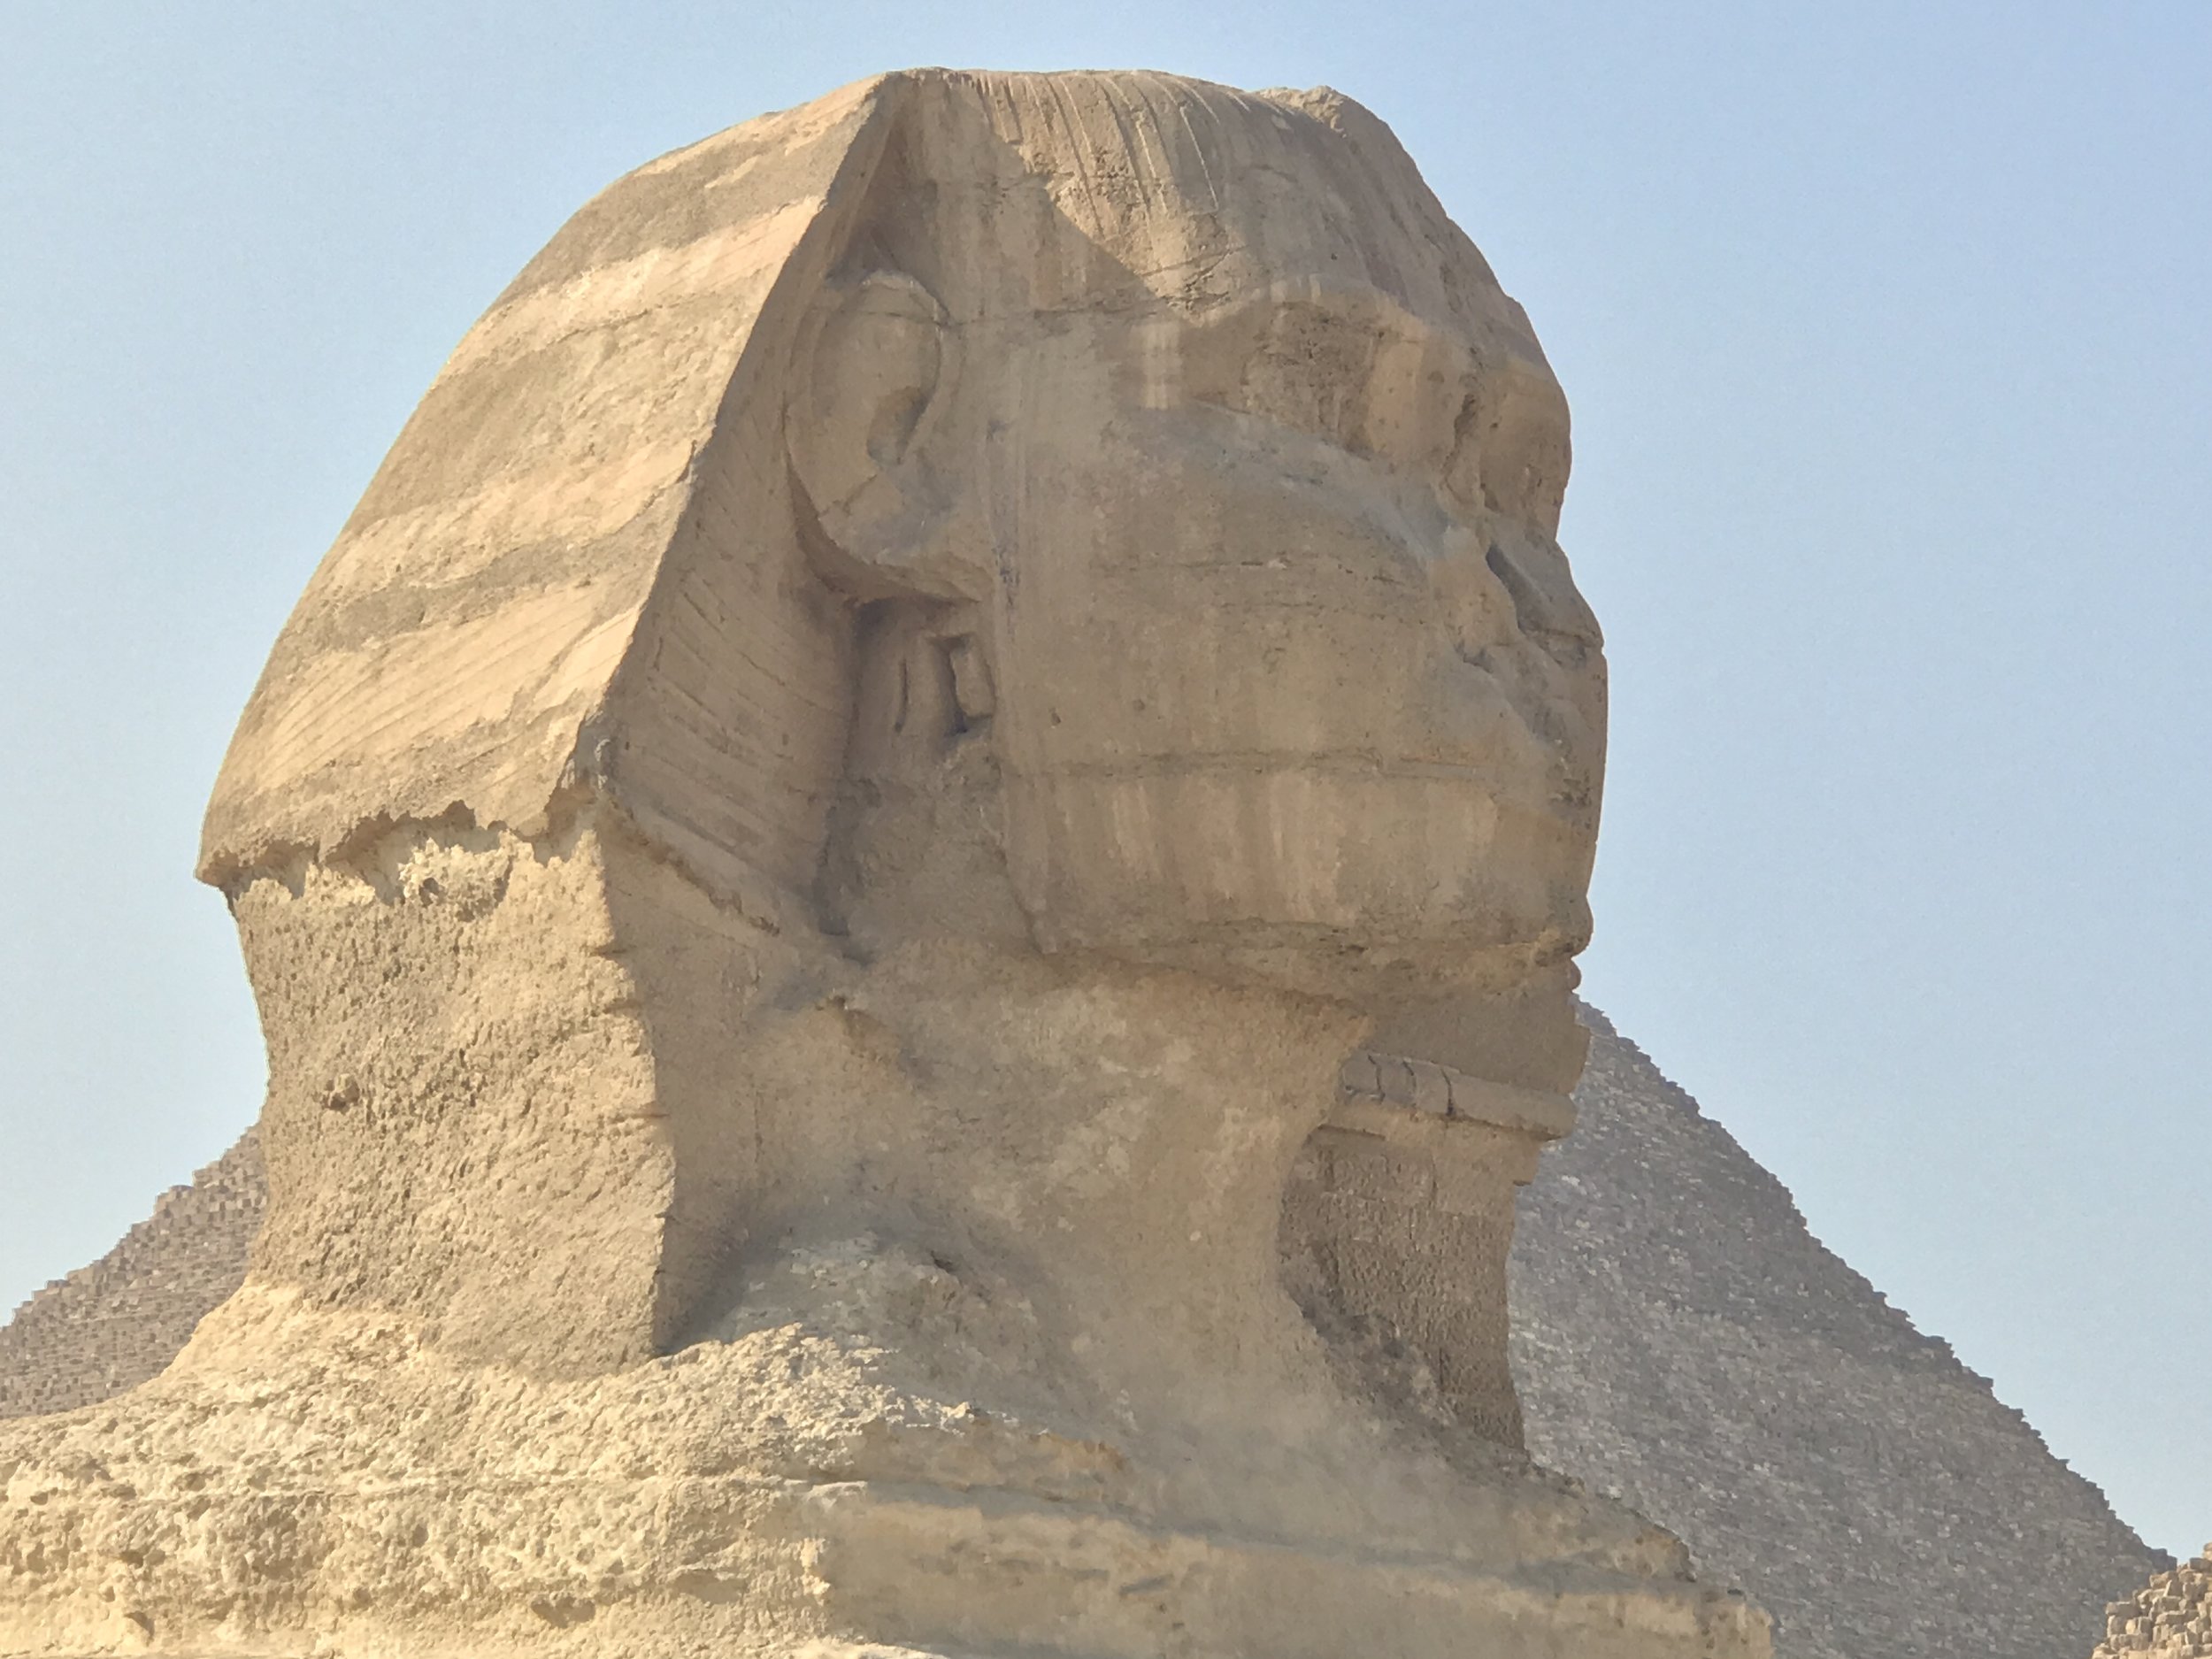 The Great Sphinx, Giza Plateau (by Erika Mermuse)